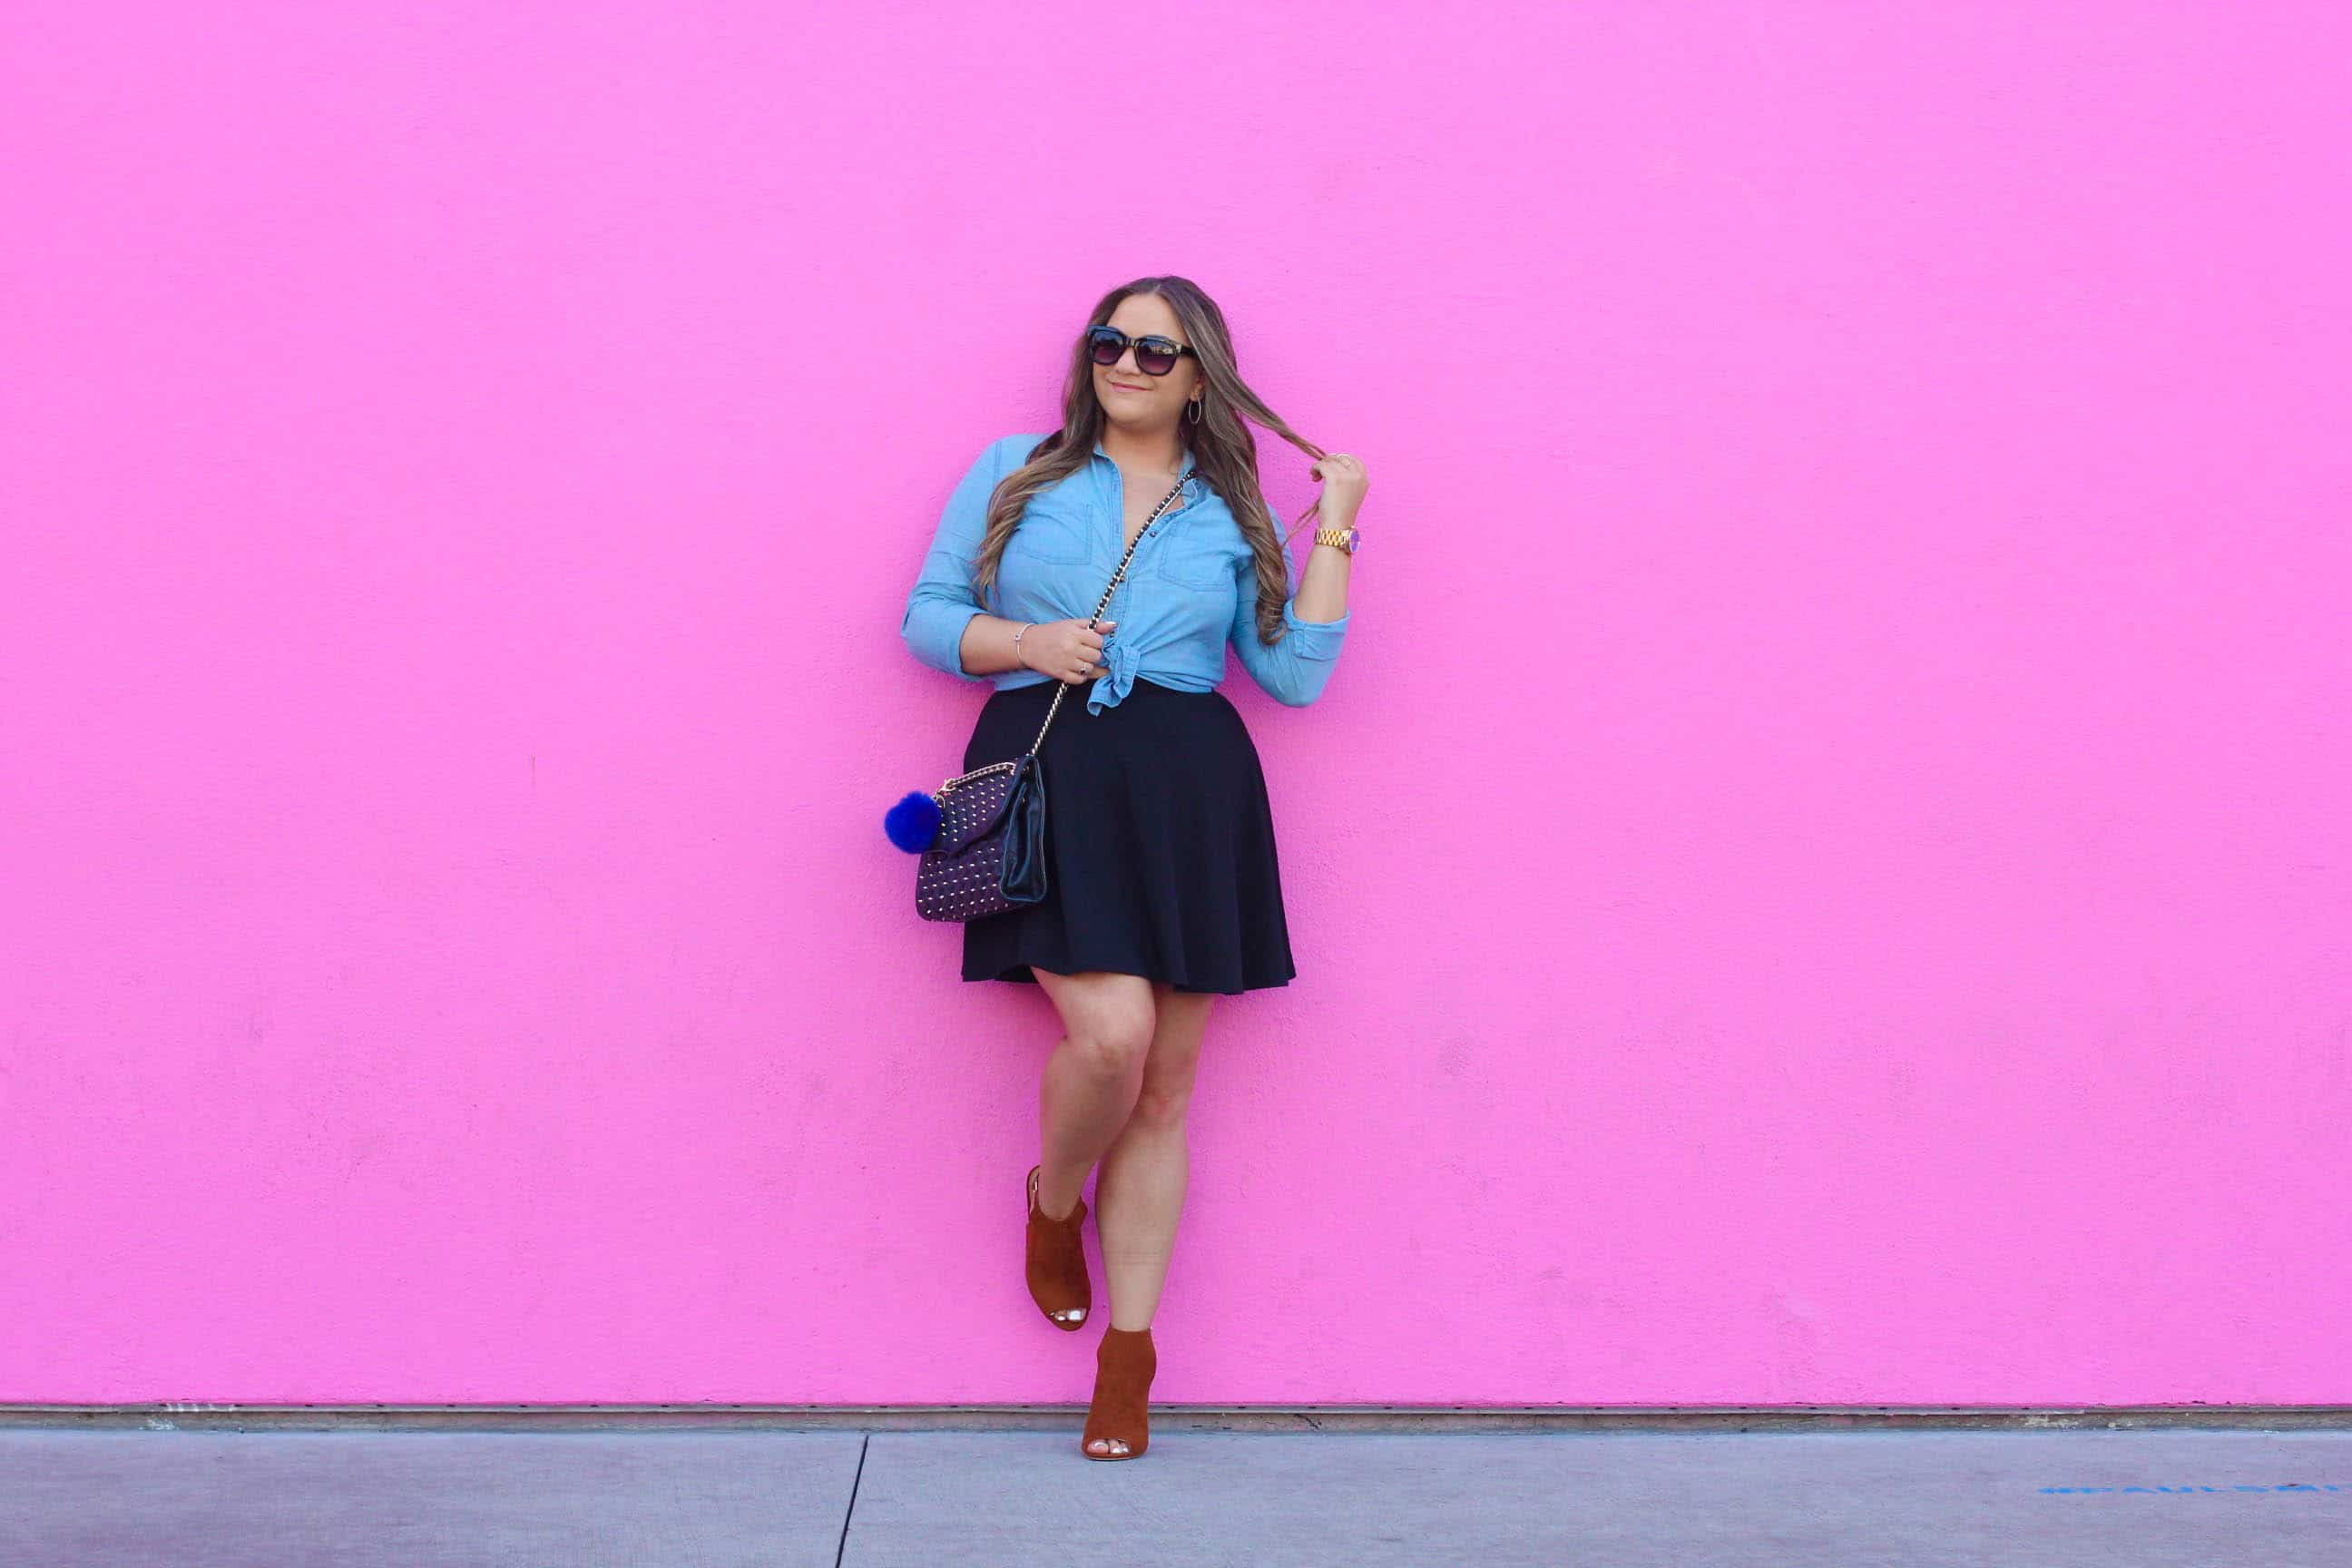 missyonmadison, melissa tierney, missyonmadison instagram, fashion blog, fashion blogger, bloglovin, style goals, style watch, forever 21, black mini skirt, black skater skirt, chesnut booties, tan booties, peep toe booties, rebecca minkoff, quilted bag, rebecca minkoff affair bag, rebecca minkoff quilted bag, wayfarer sunglasses, raybans, womens raybans, womens wayfarer sunglasses, that pink wall, pink wall la, pink wall, wall charades, wall crawl, blue pom pom, blue pom pom keychain, wall crawl la, la wall crawl, best murals in la, paul smith pink wall, la blogger, la style, chambray button down, old navy, chambray button down shirt,